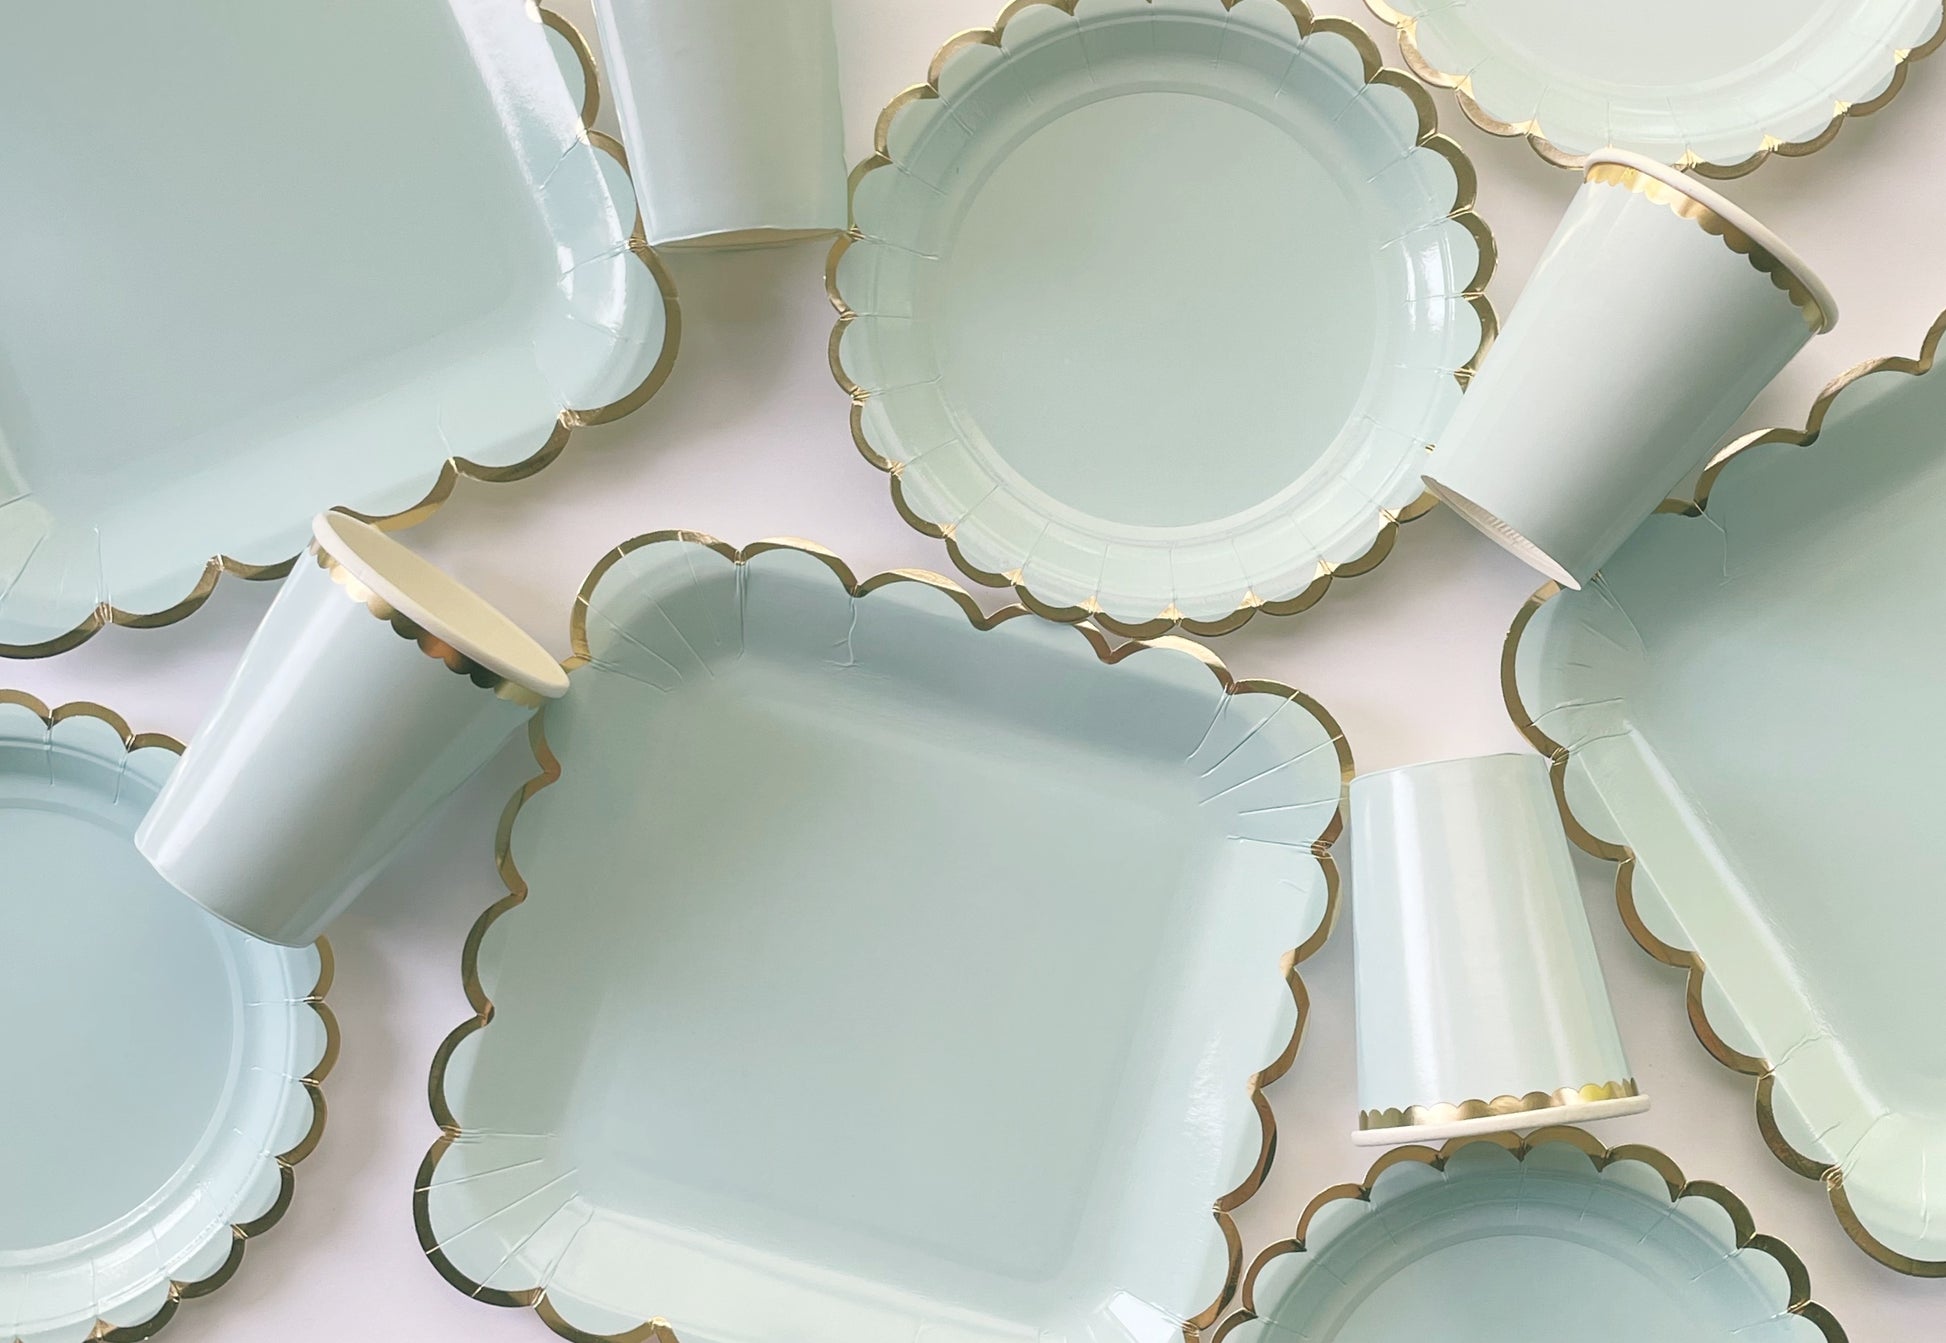 Paper party plates and cups. They are a pale pastel blue colour with gold foil scalloped trim.